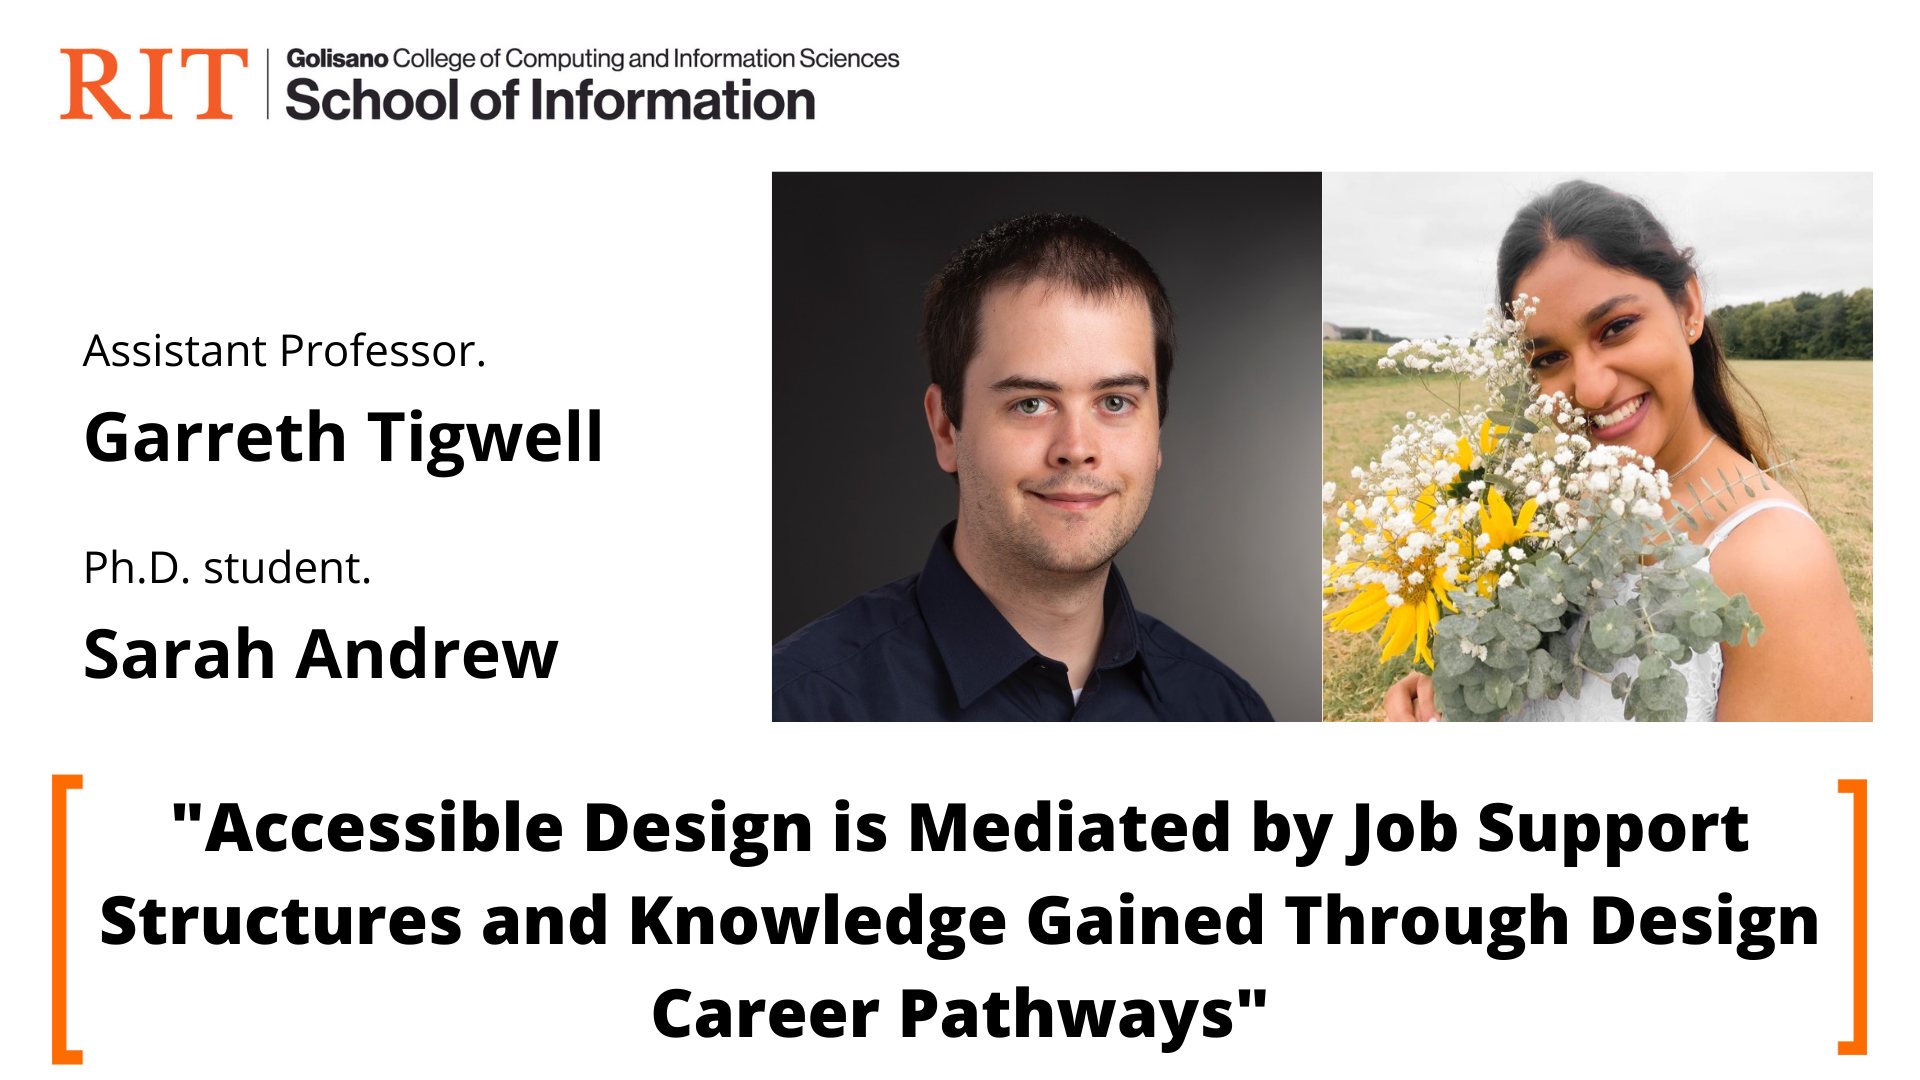 The School of Information logo is on the left top, and two headshots, Assistant Professor Garreth Tigwell is on the left and Ph.D. student Sara Andrew is on the left. At the bottom, the paper title is listed as “Accessible Design is Mediated by Job Support Structures and Knowledge Gained Through Design Career Pathways.” 